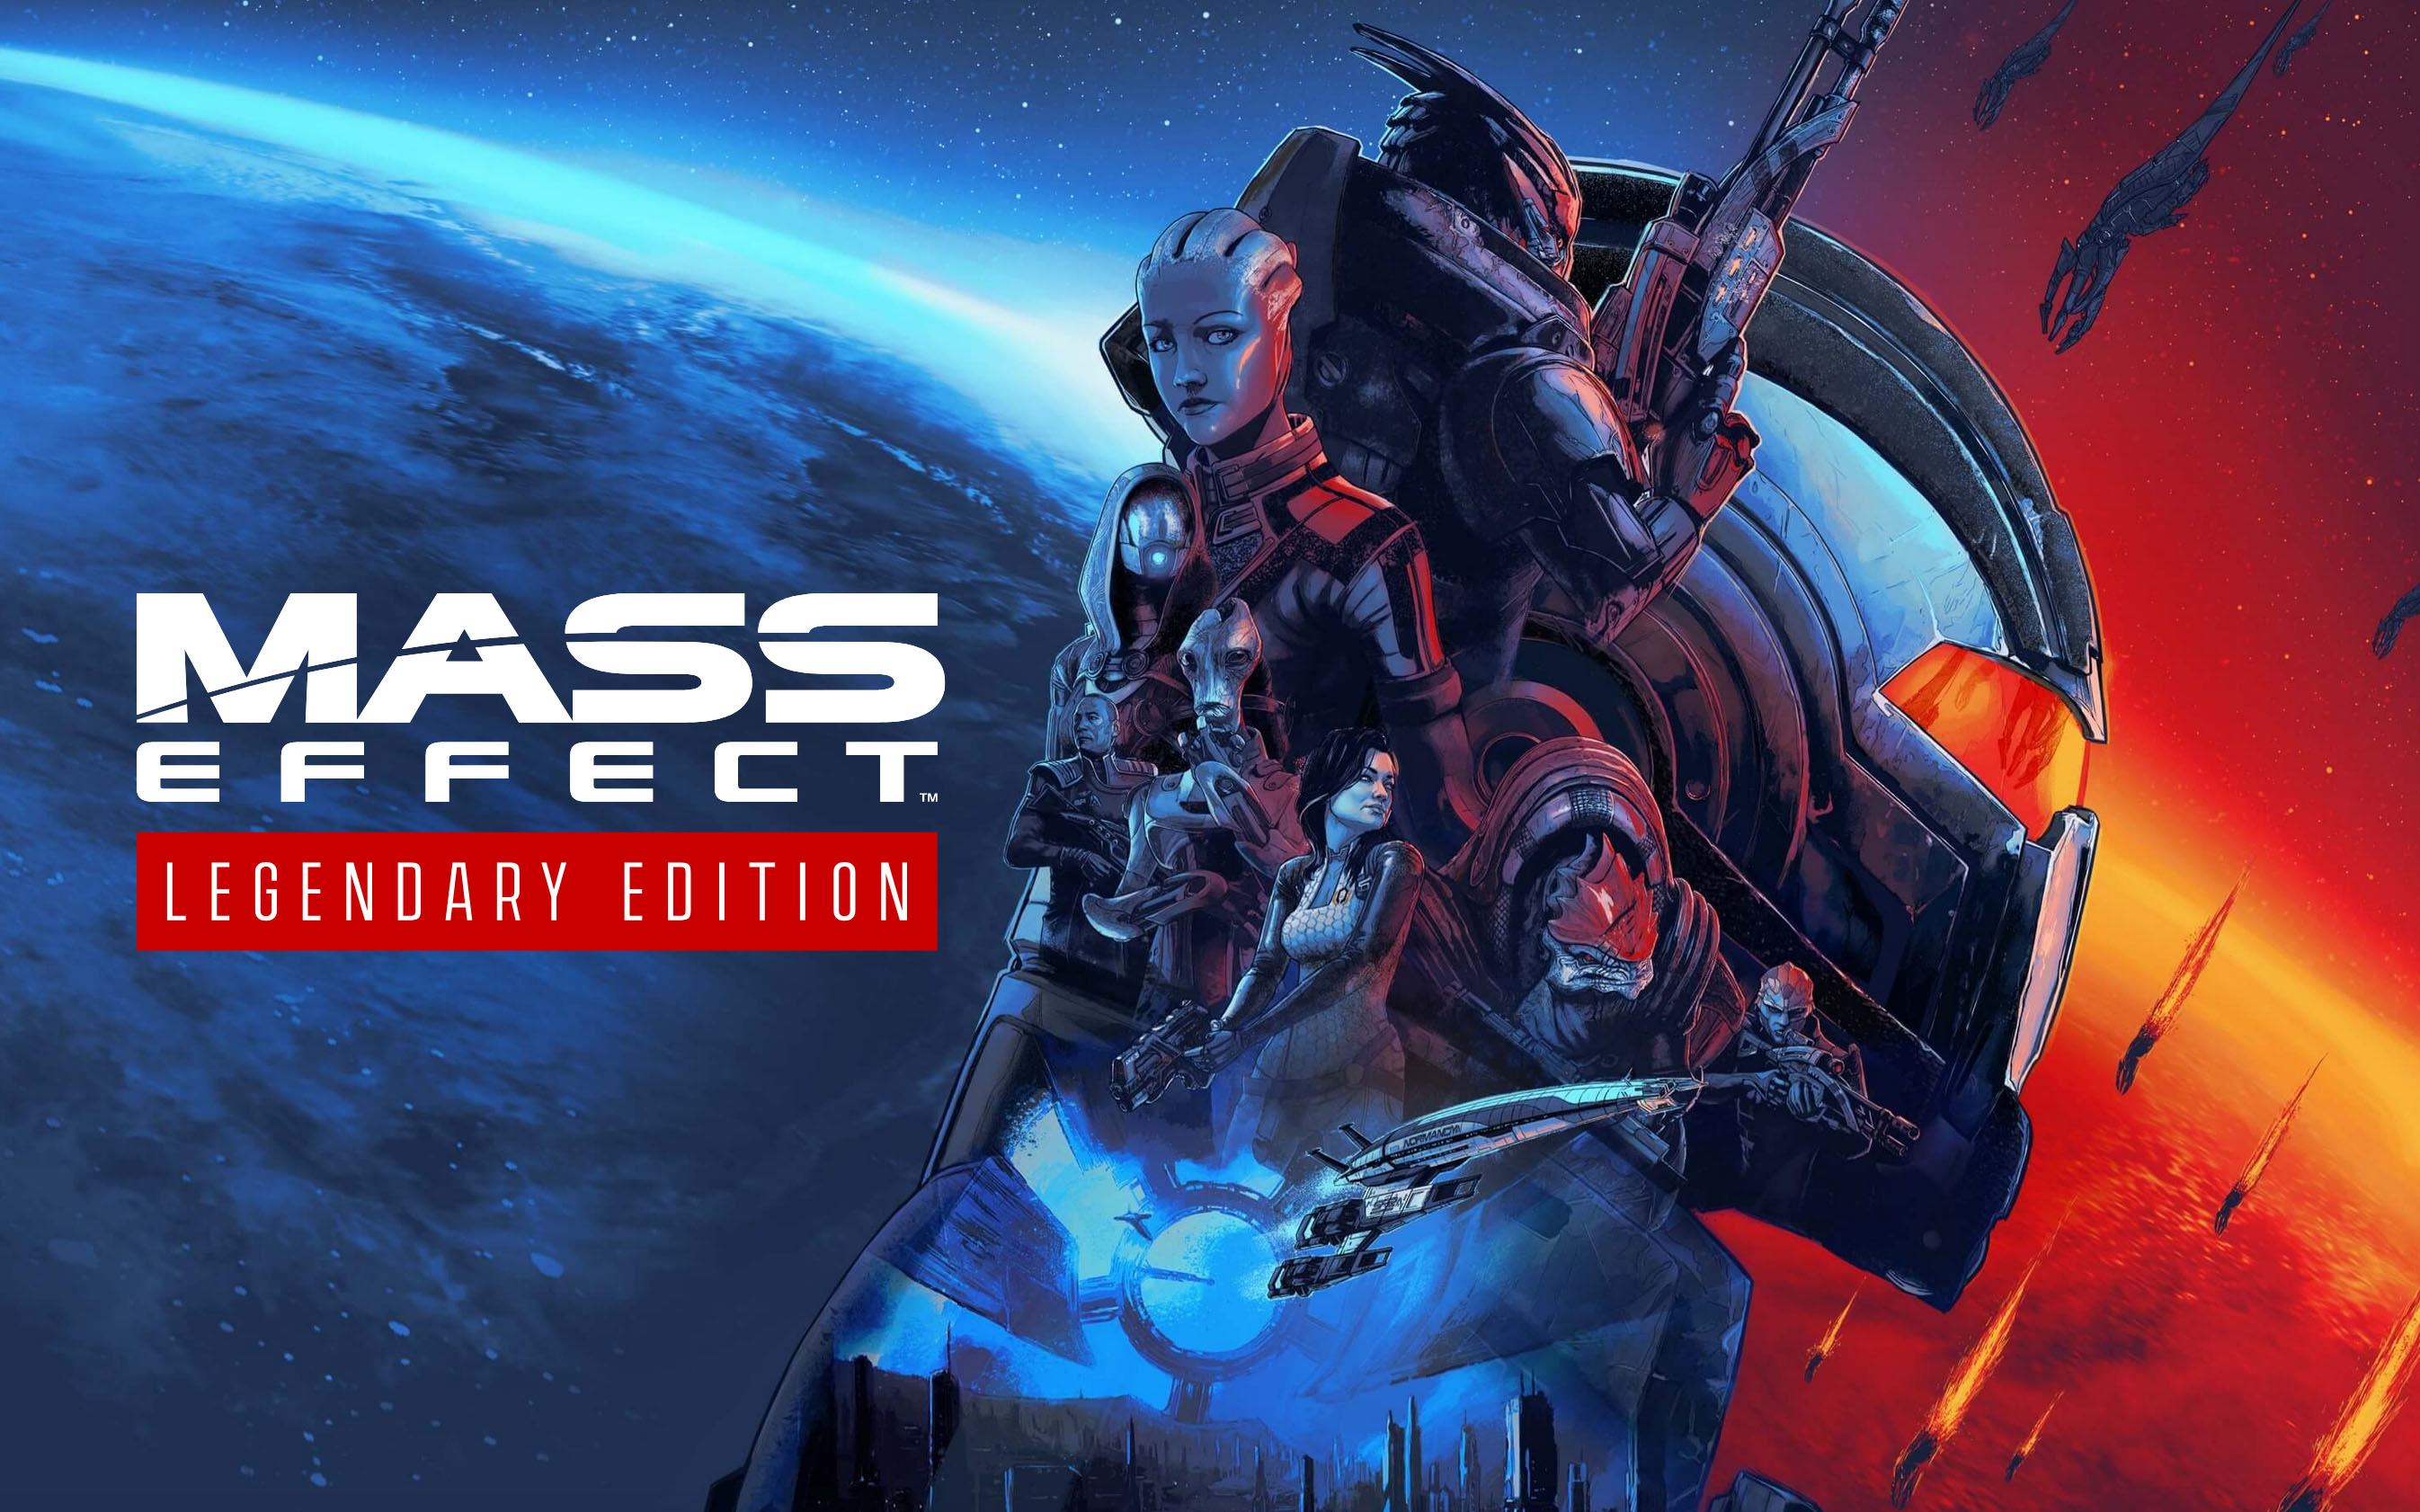 Cover art for the game 'Mass Effect Legendary Edition'